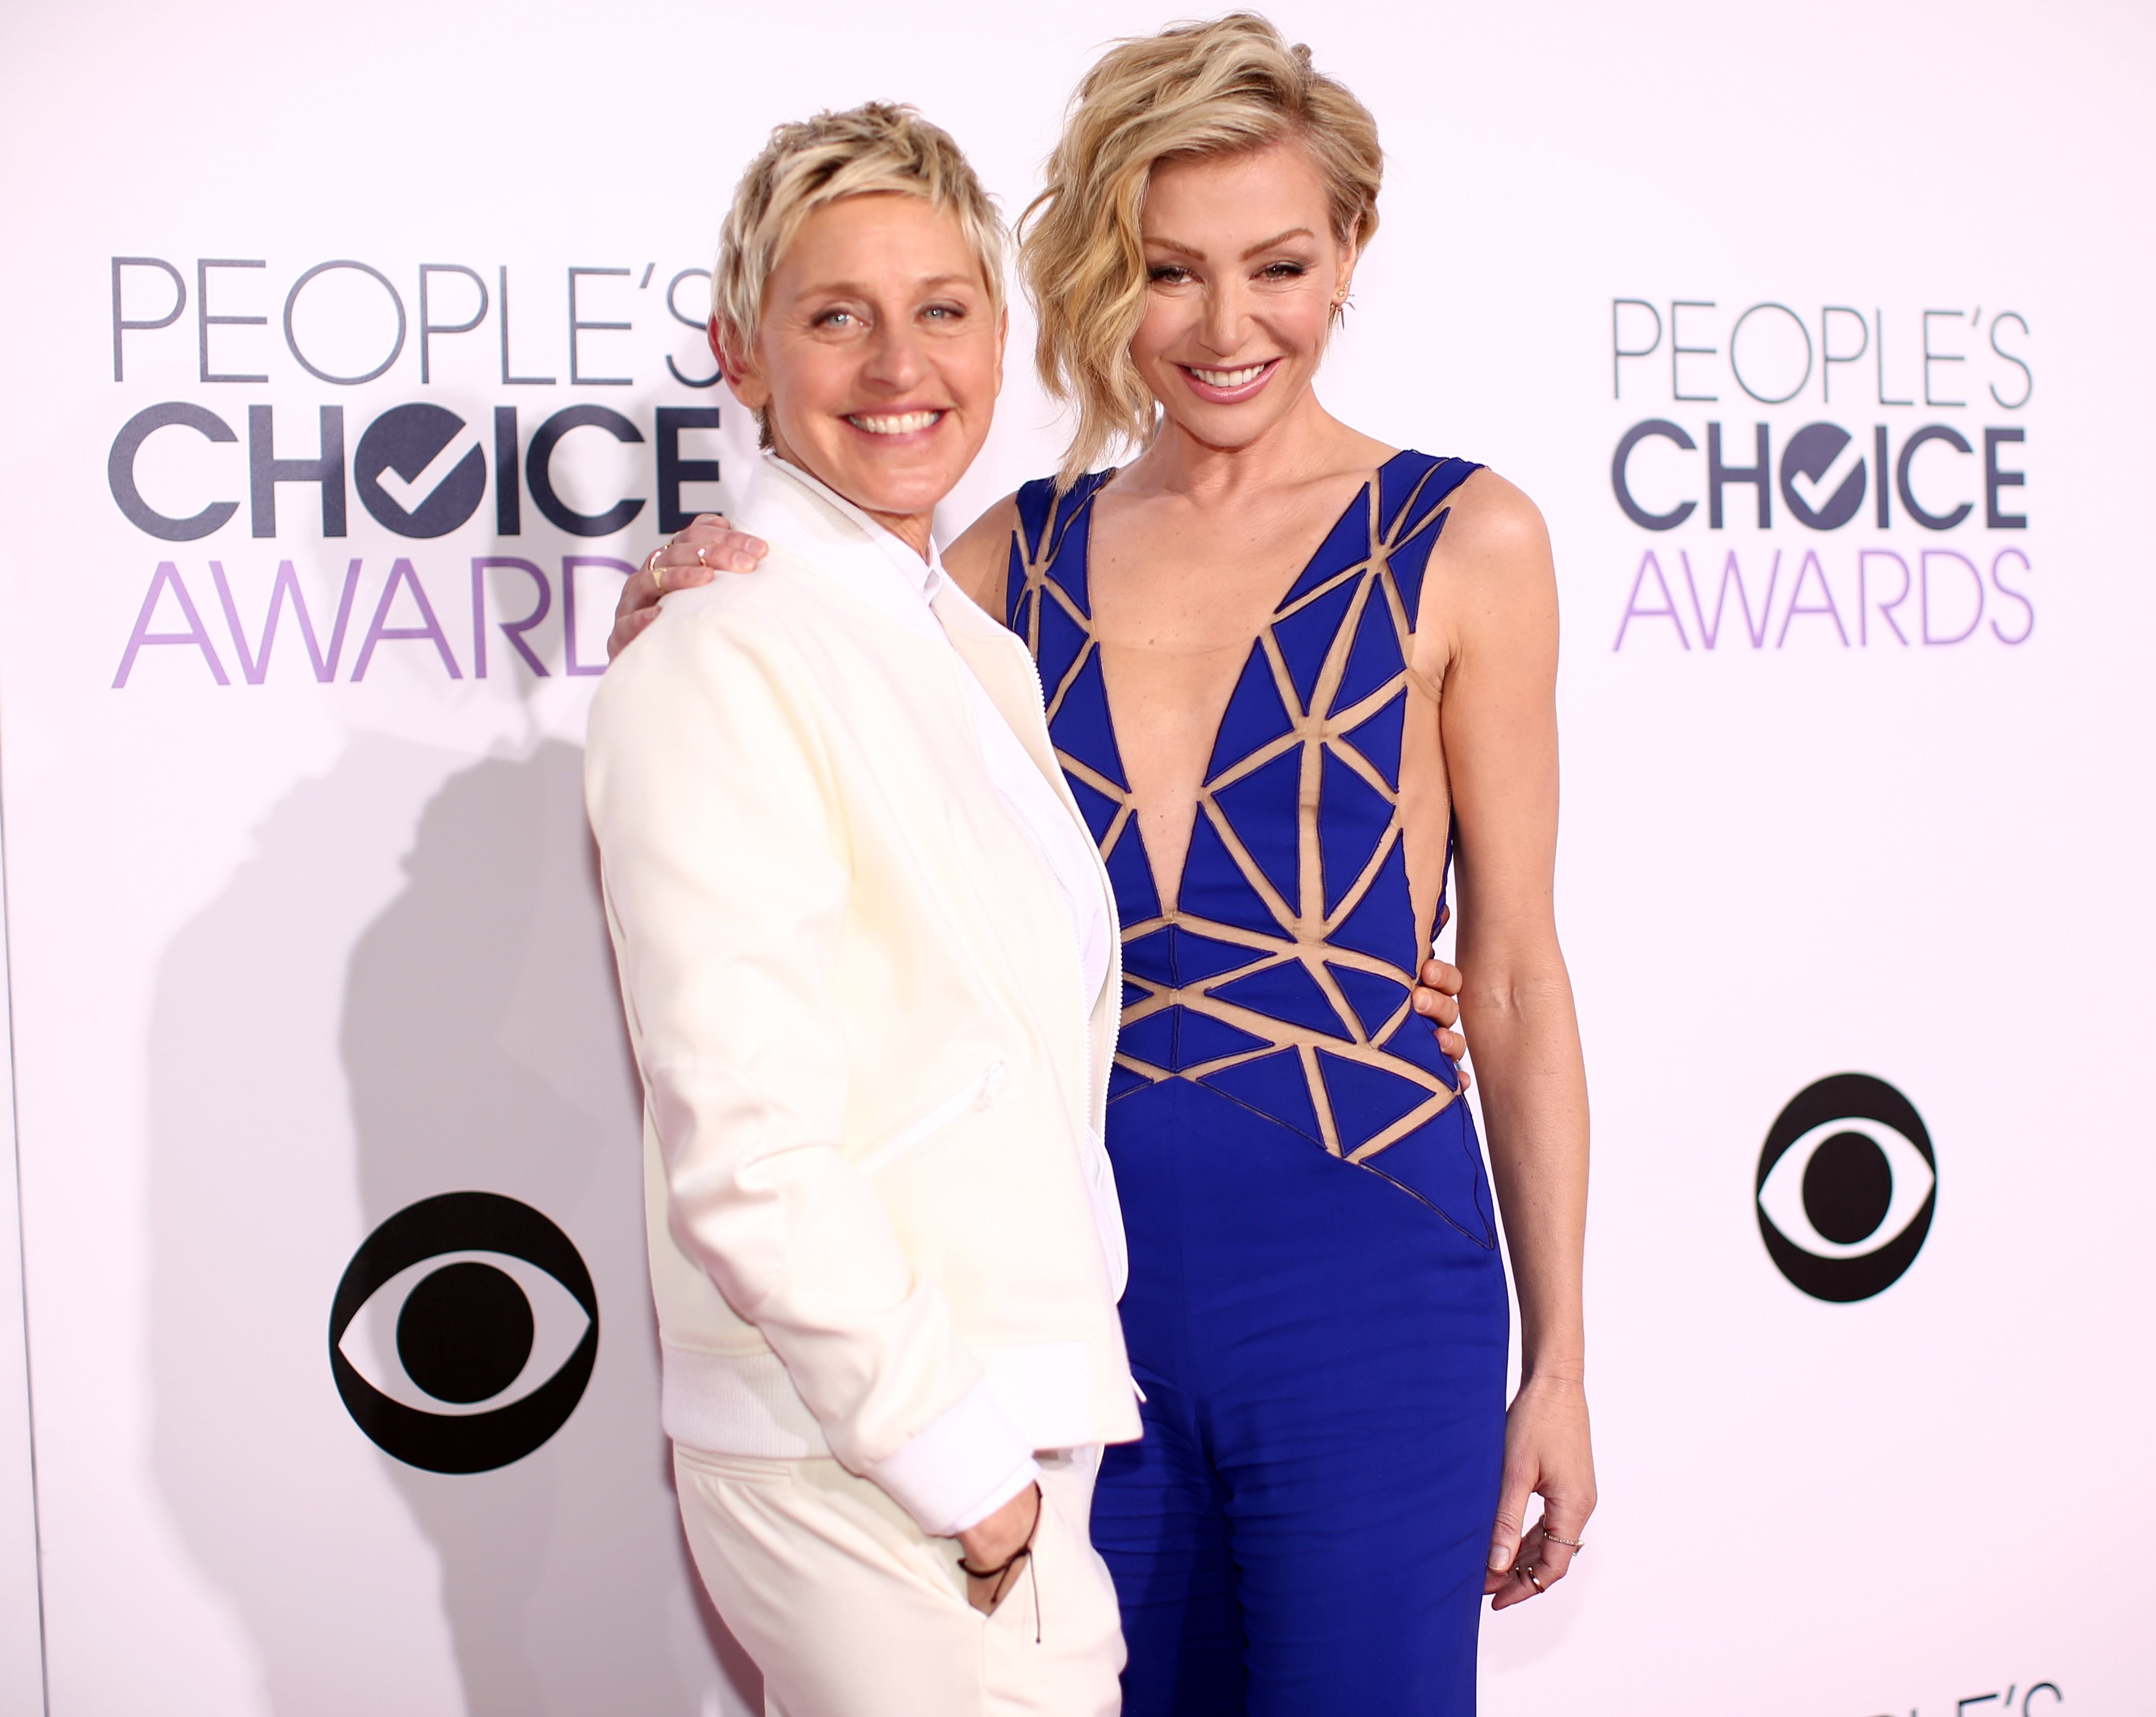  Ellen DeGeneres and actress Portia de Rossi at The 41st Annual People's Choice Awards at Nokia Theatre LA Live on January 7, 2015 | Photo: Getty Images 